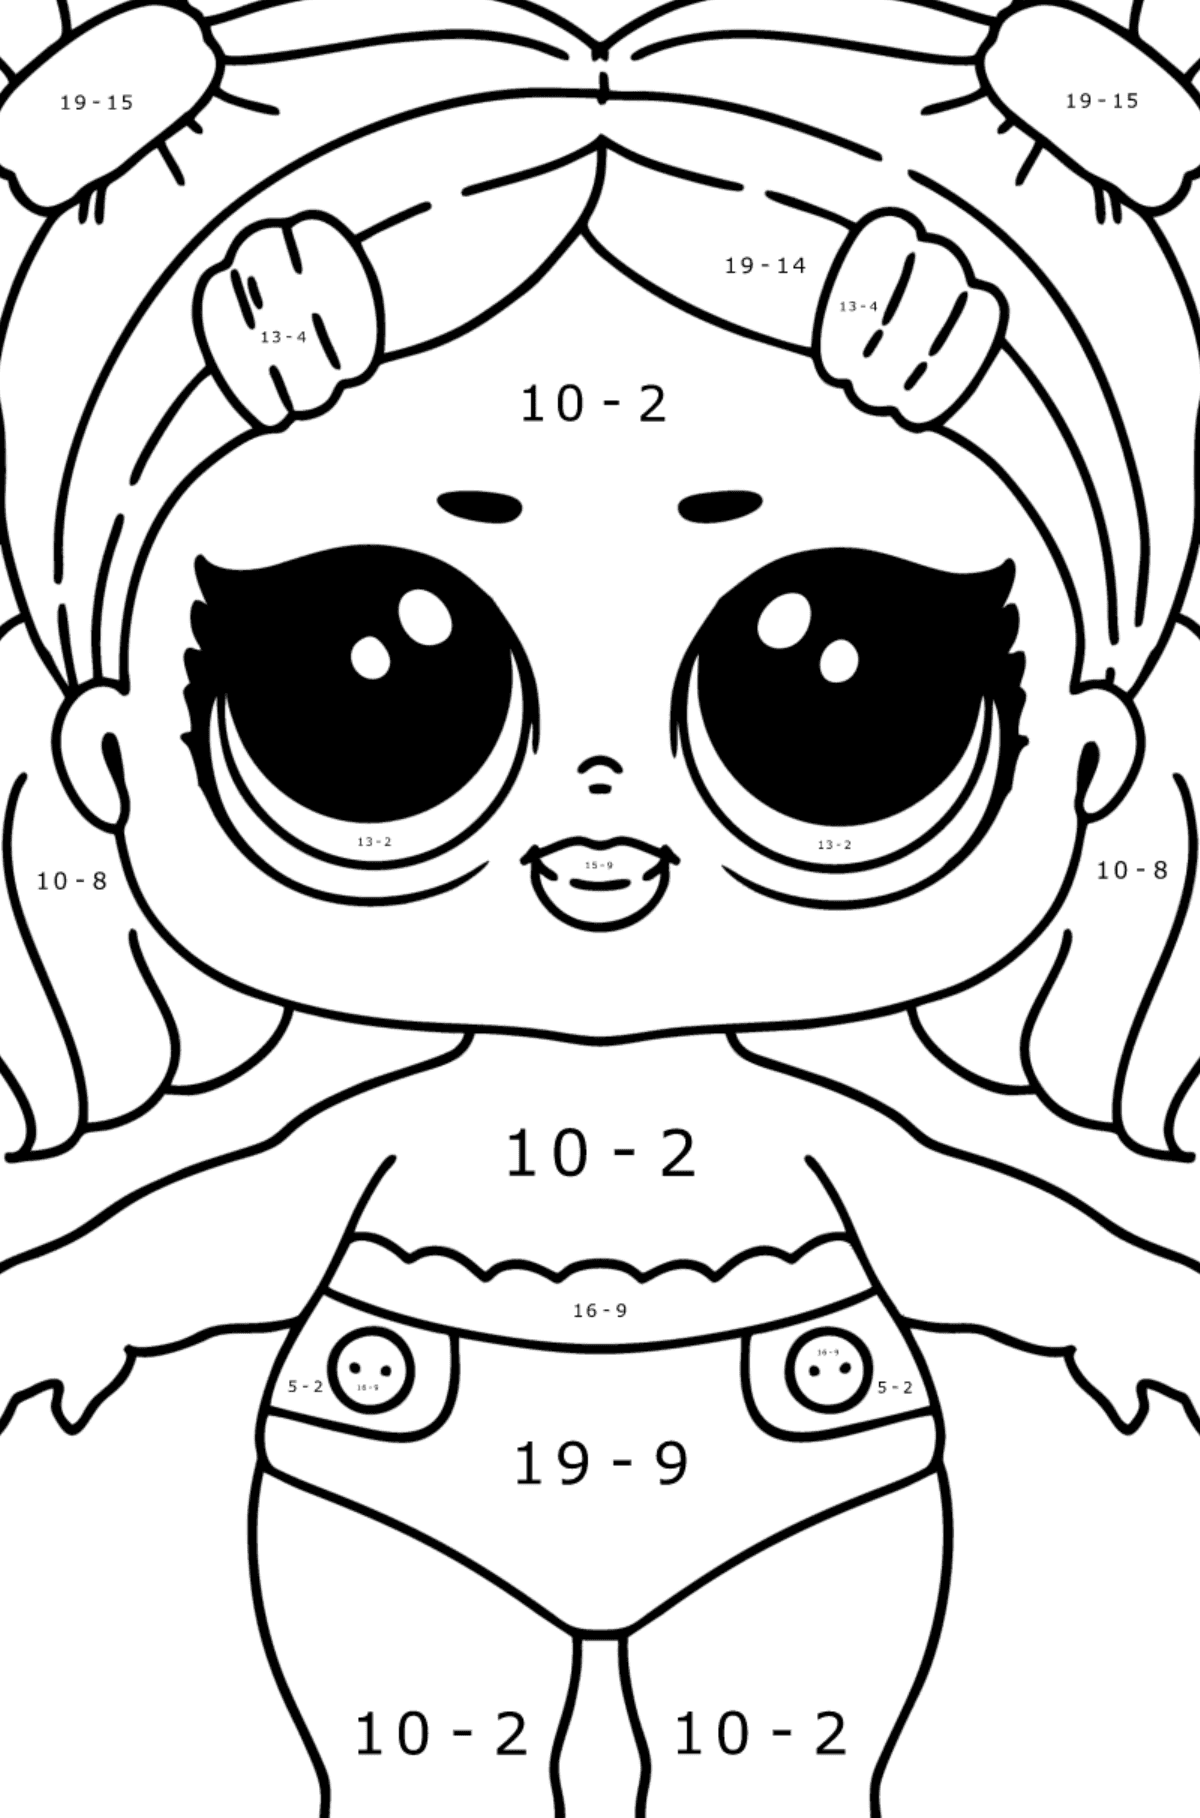 Coloring page LOL LIL Dusk - Math Coloring - Subtraction for Kids